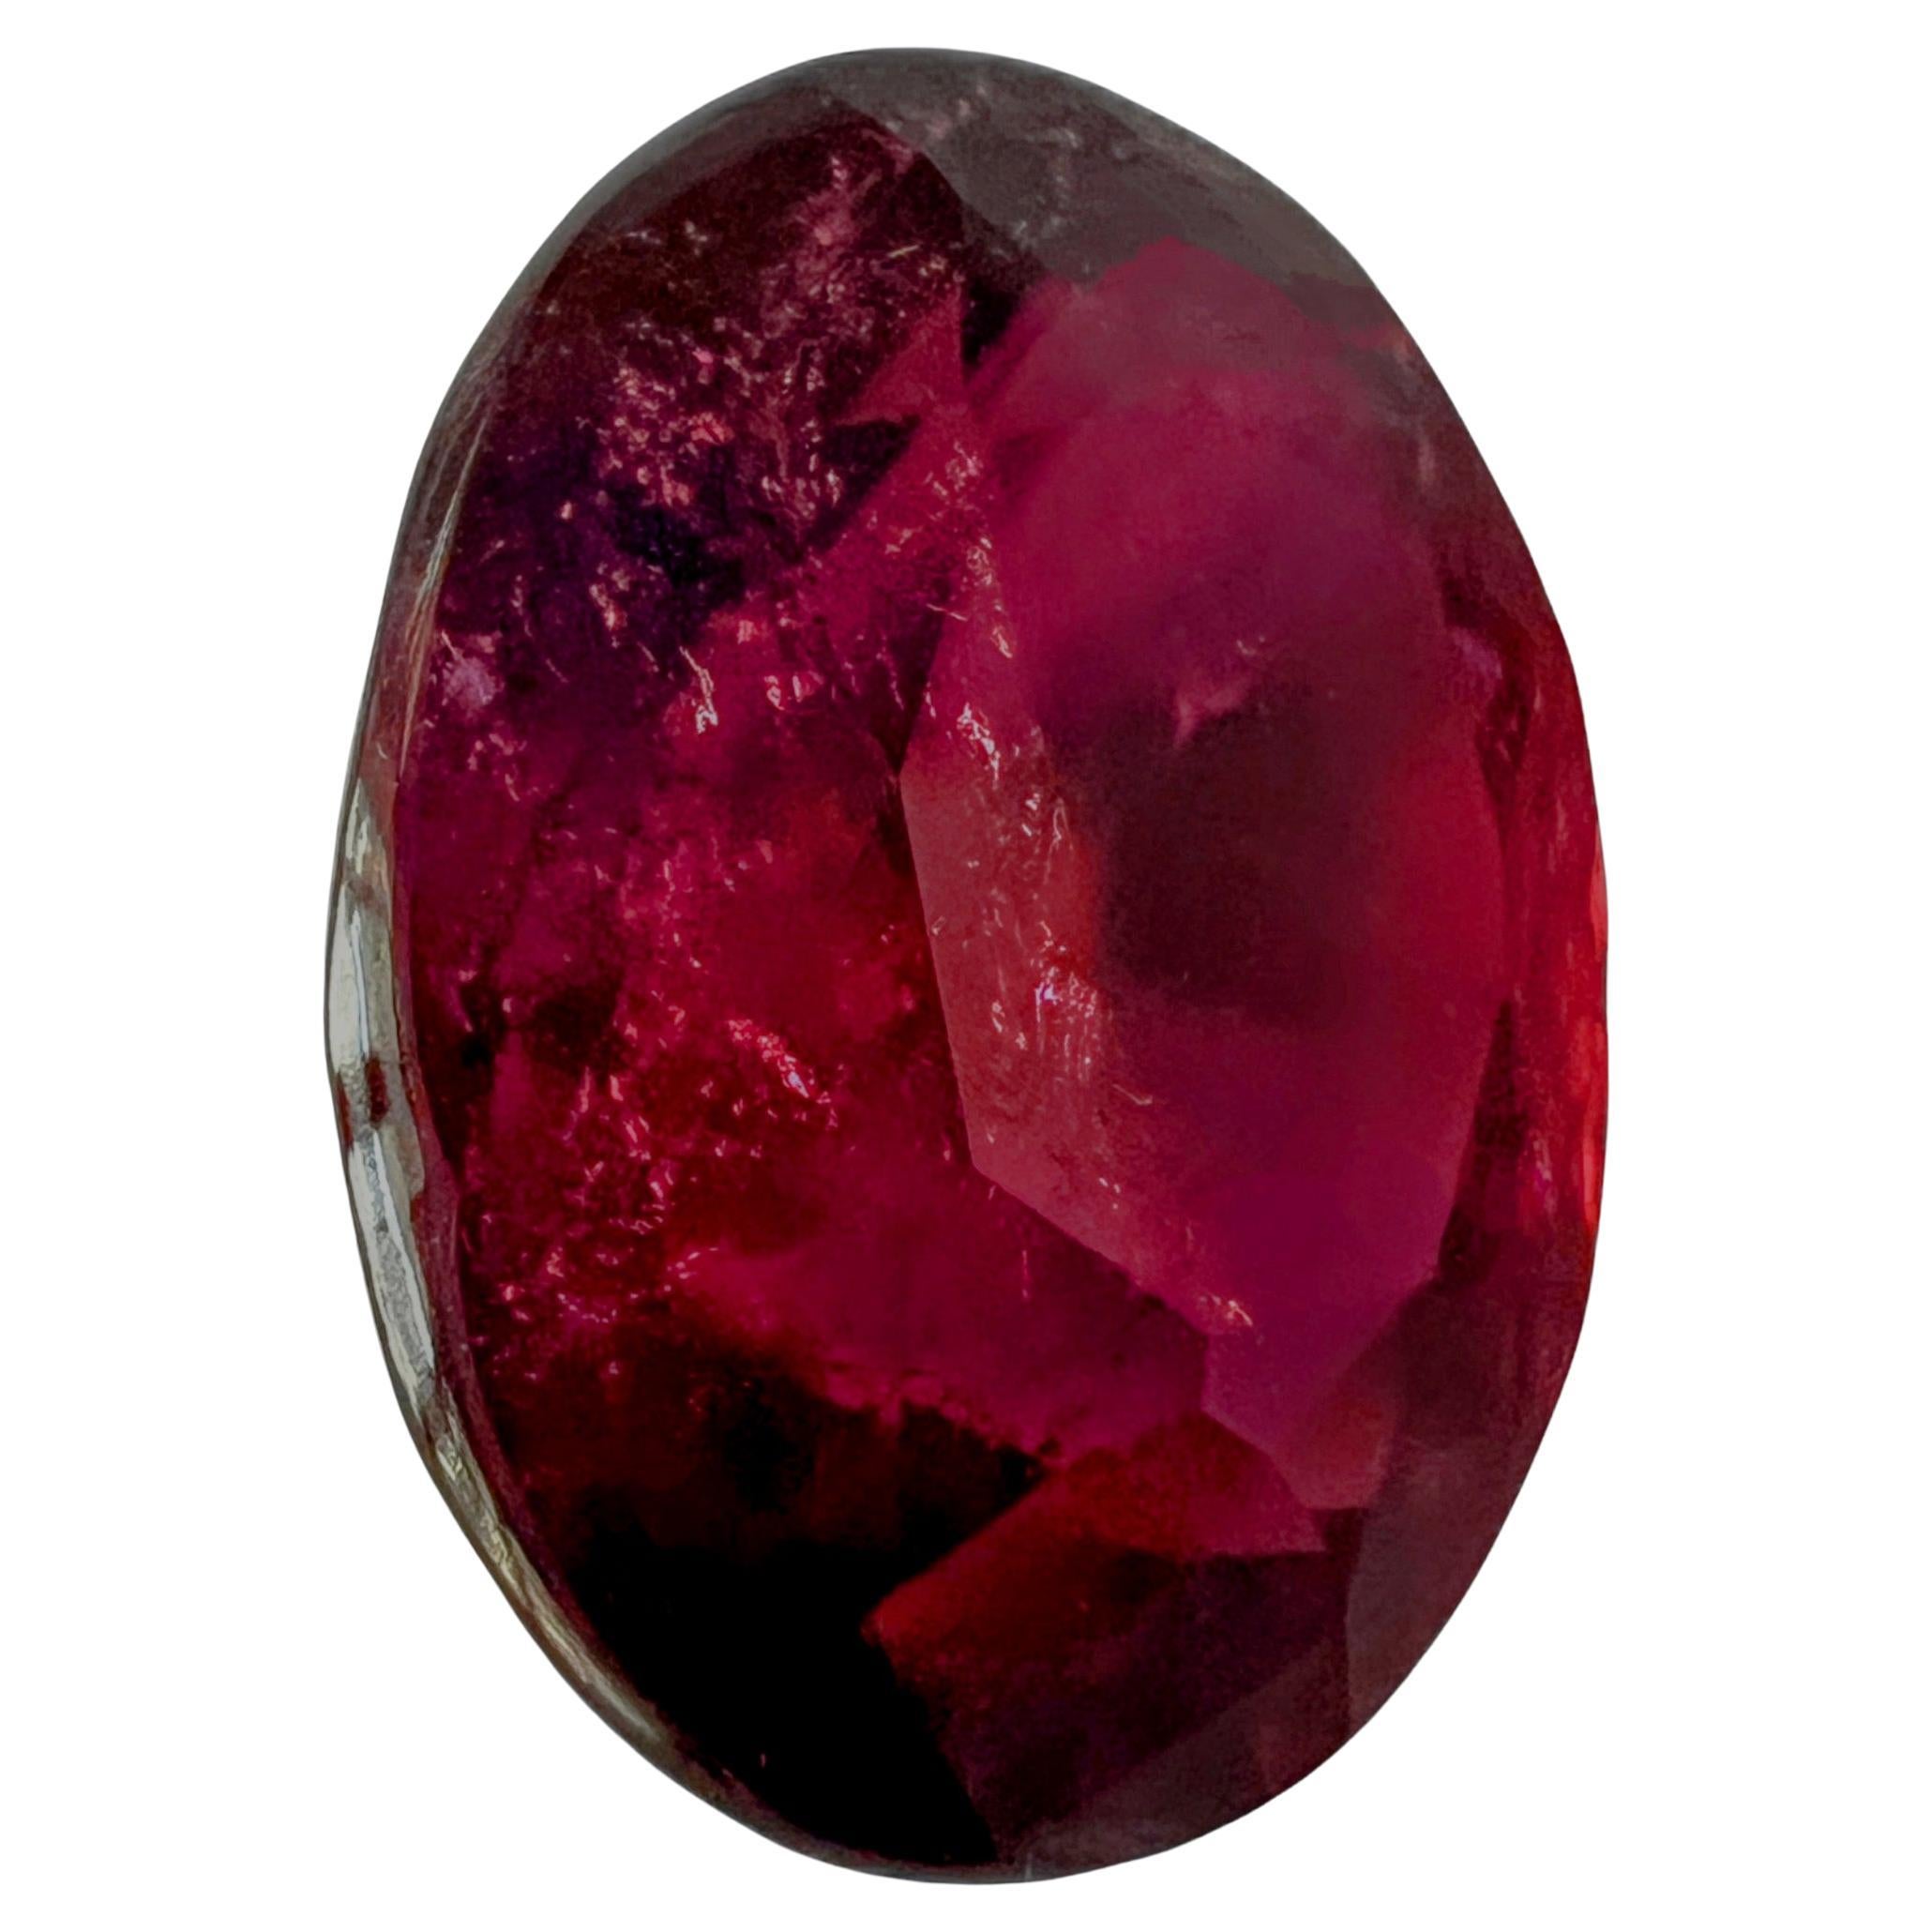 Prepare to be captivated by the radiant beauty of our 18.14ct Oval Intense Red Rubellite Loose Tourmaline with pinkish overtone—a gem that exudes a fiery allure with its remarkable hue and the natural inclusions that add character and depth to its